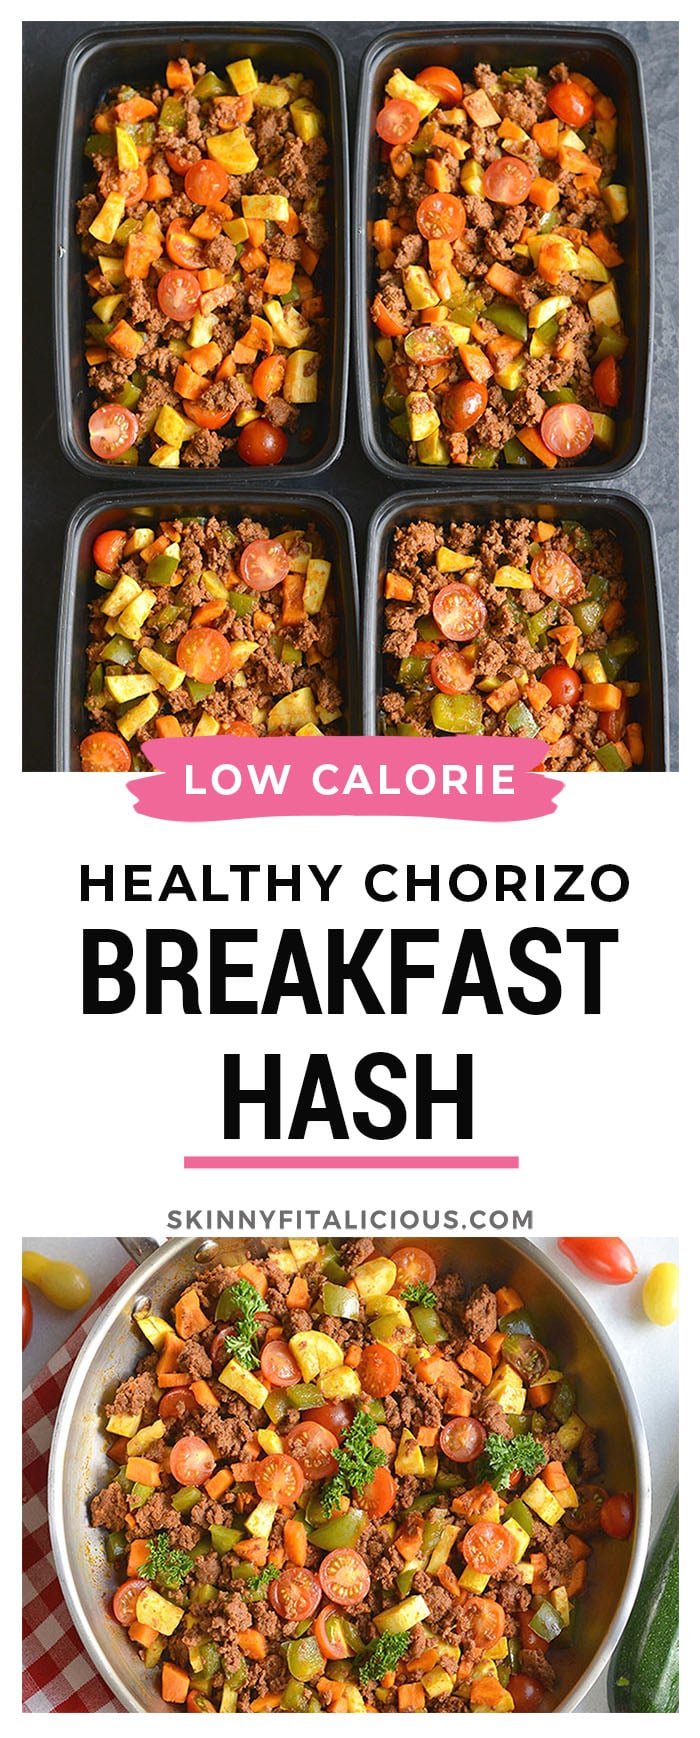 Chorizo Sweet Potato Breakfast Hash! This egg free hash is loaded with vegetables, flavor and nourishment. A filling Whole30 breakfast that strikes the perfect balance of sweet & savory!